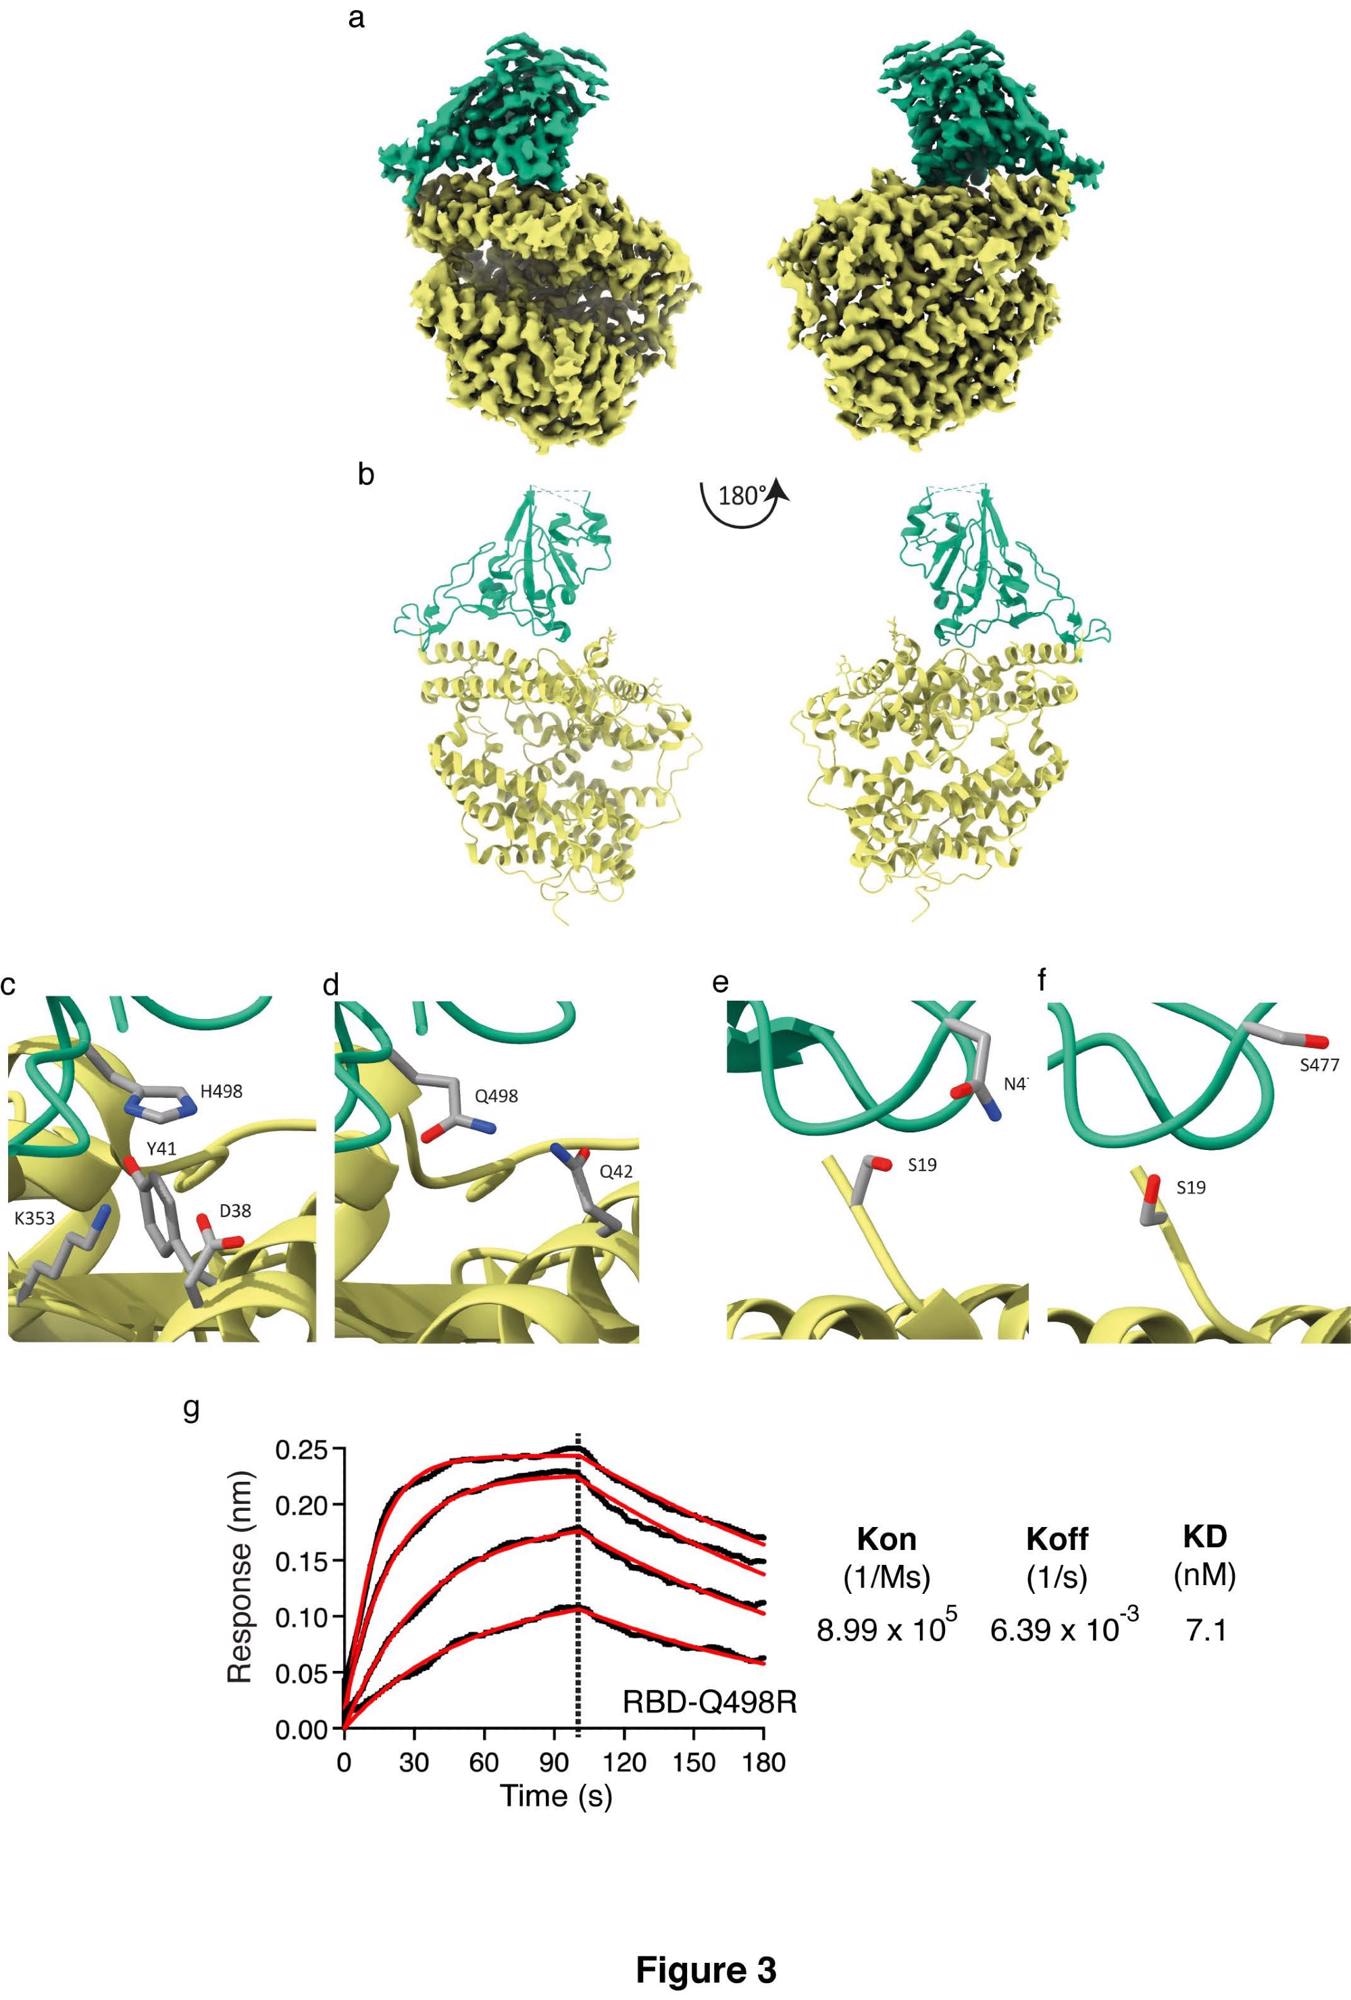 Structure of RBD4.8 in complex with HuACE2 Cryo-EM structure and model of the ACE2-RBD complex. Sharpened Cryo-EM map (a) of the HuACE2-RBD4.8 complex with ACE2 colored yellow and RBD in green. The refined coordinates are shown in cartoon representation (b) and colored as above. In panel (c) H498 can be seen in proximity to ACE2 Y41 forming a non-planar π-interaction while ACE2 residues K353 and D38 are within hydrogen-bonding distance to H498 and could contribute to the tighter interaction formed by this RBD mutant, whereas Panel (d) shows Q498 in RBD1 (PDB accession number 6M0J, 19) in proximity to ACE-2 Q42. Panel (e) indicates that the S477N substitution places this longer side-chain closer to S19 in ACE2 and within hydrogen-bonding distance thus enhancing the binding between HuACE2 and RBD4.8. Panel (f) shows the positioning of S477 in RBD1 and ACE2 S19 (PDB accession number 6M0J19). (g) Biolayer interferometry was performed with RBD containing the Q498R substitution in solution and HuACE2 immobilized on the sensor. Curves were fitted and used to calculate Kon, Koff and KD.